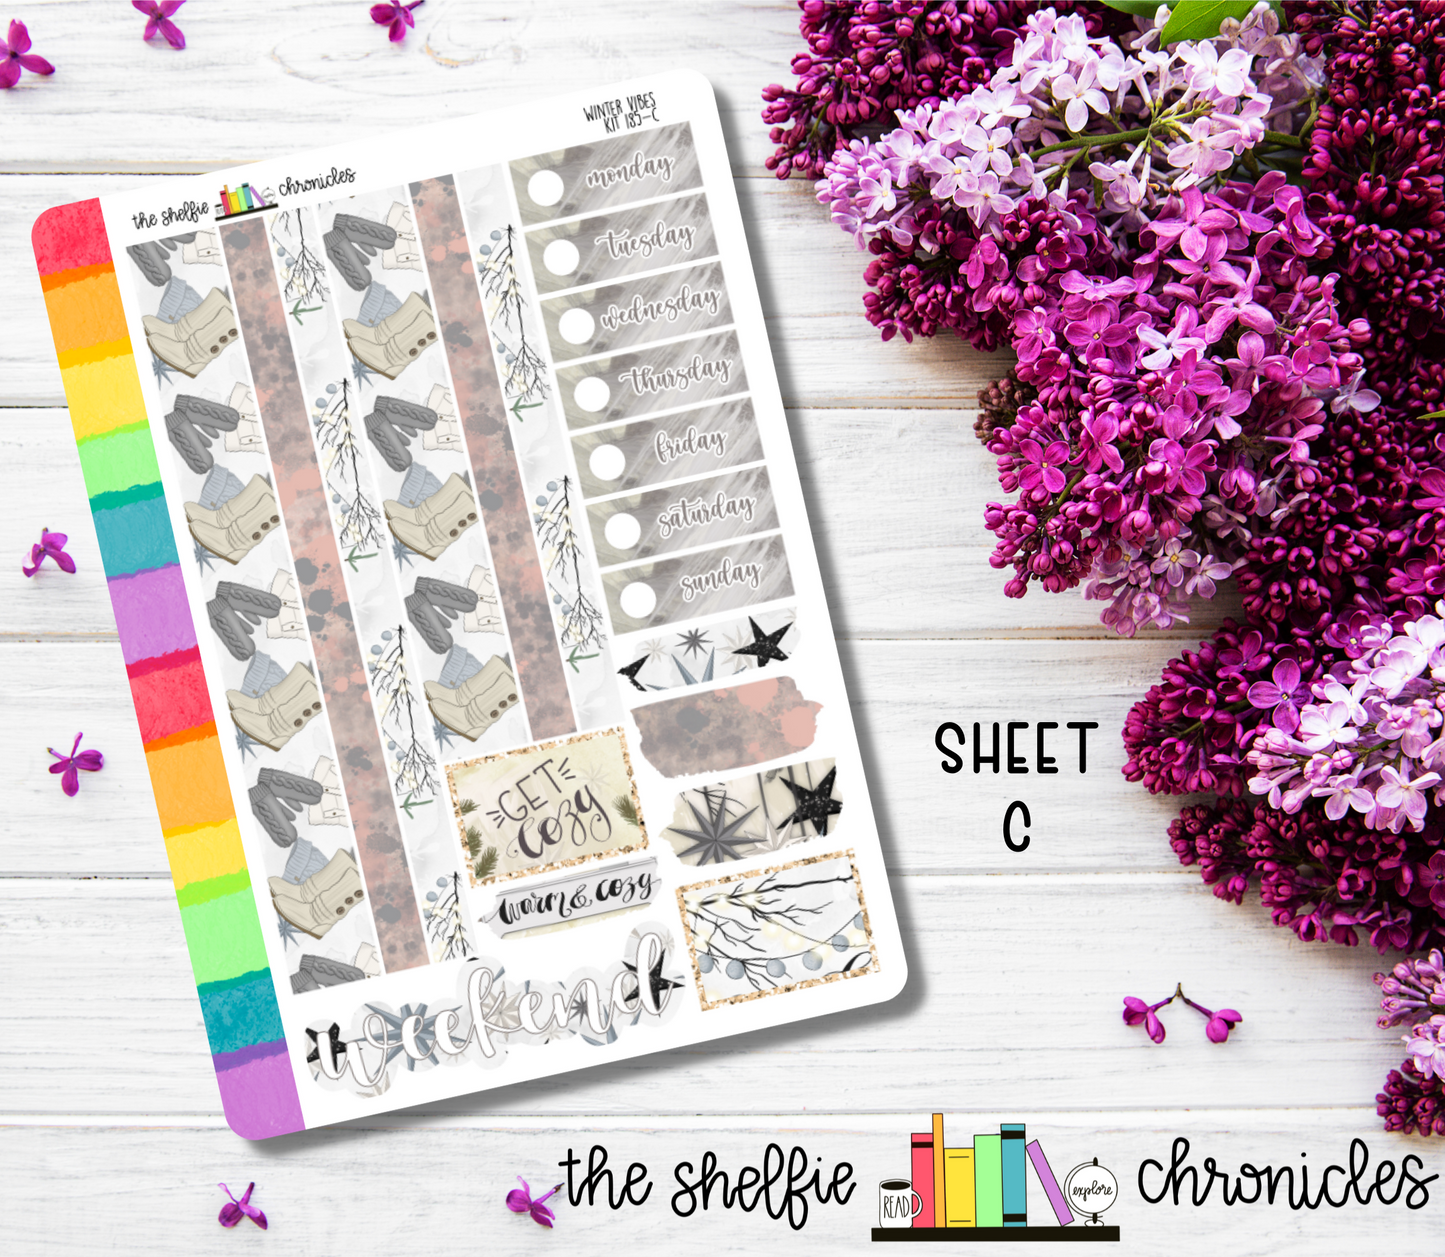 Kit 185 - Winter Vibes Weekly Kit - Die Cut Stickers - Repositionable Paper - Made To Fit 7x9 Planners